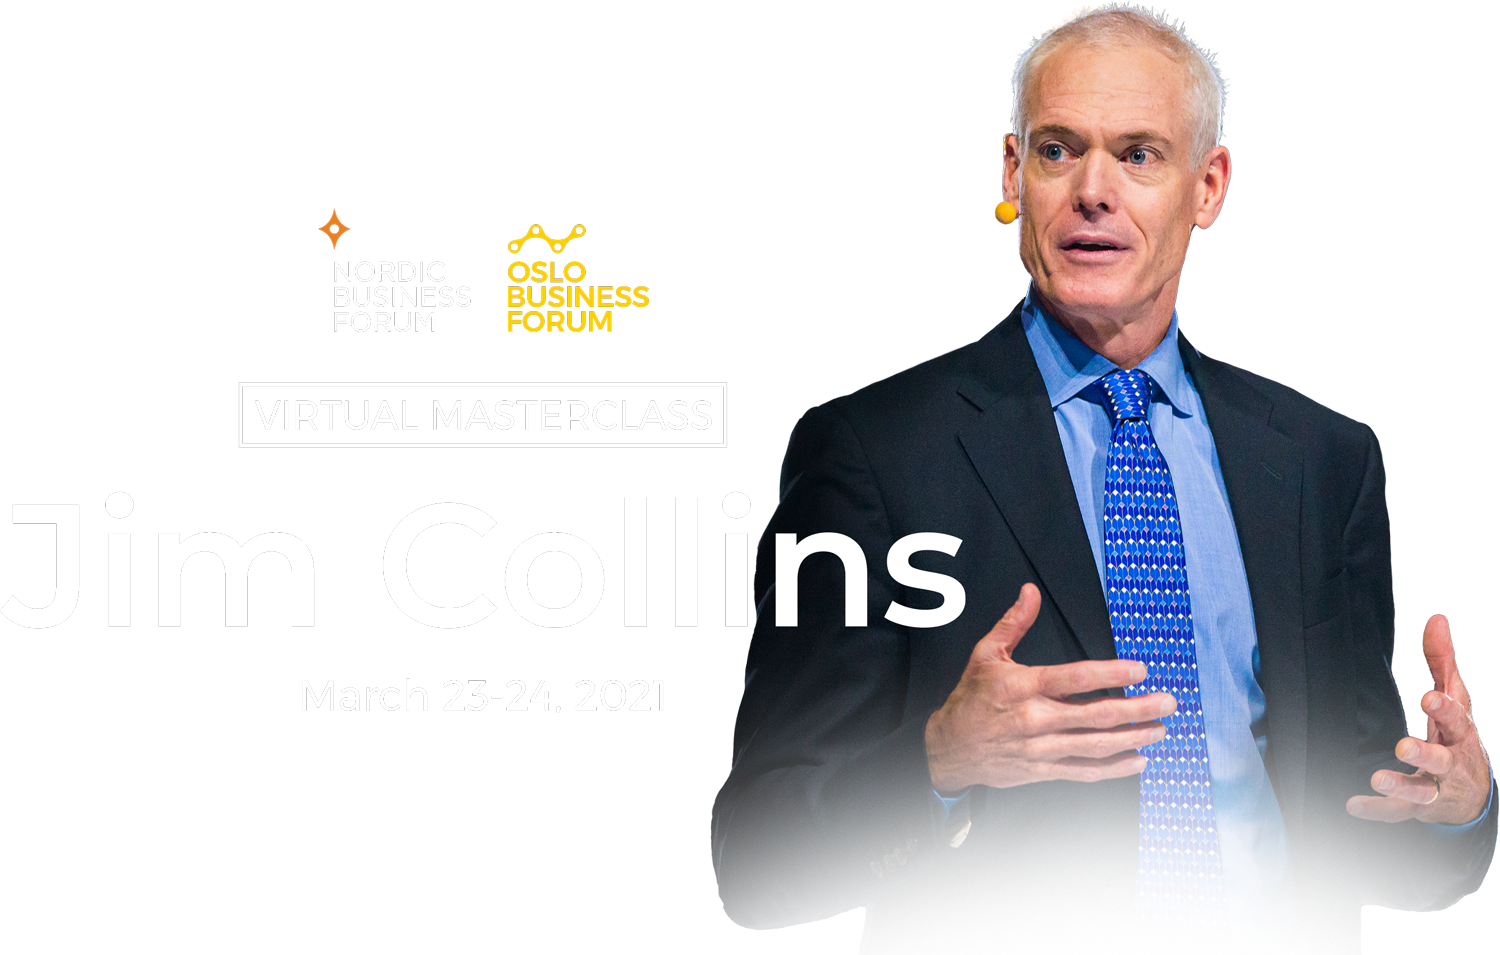 Just like being there: virtual venue for 2021 Jim Collins global event